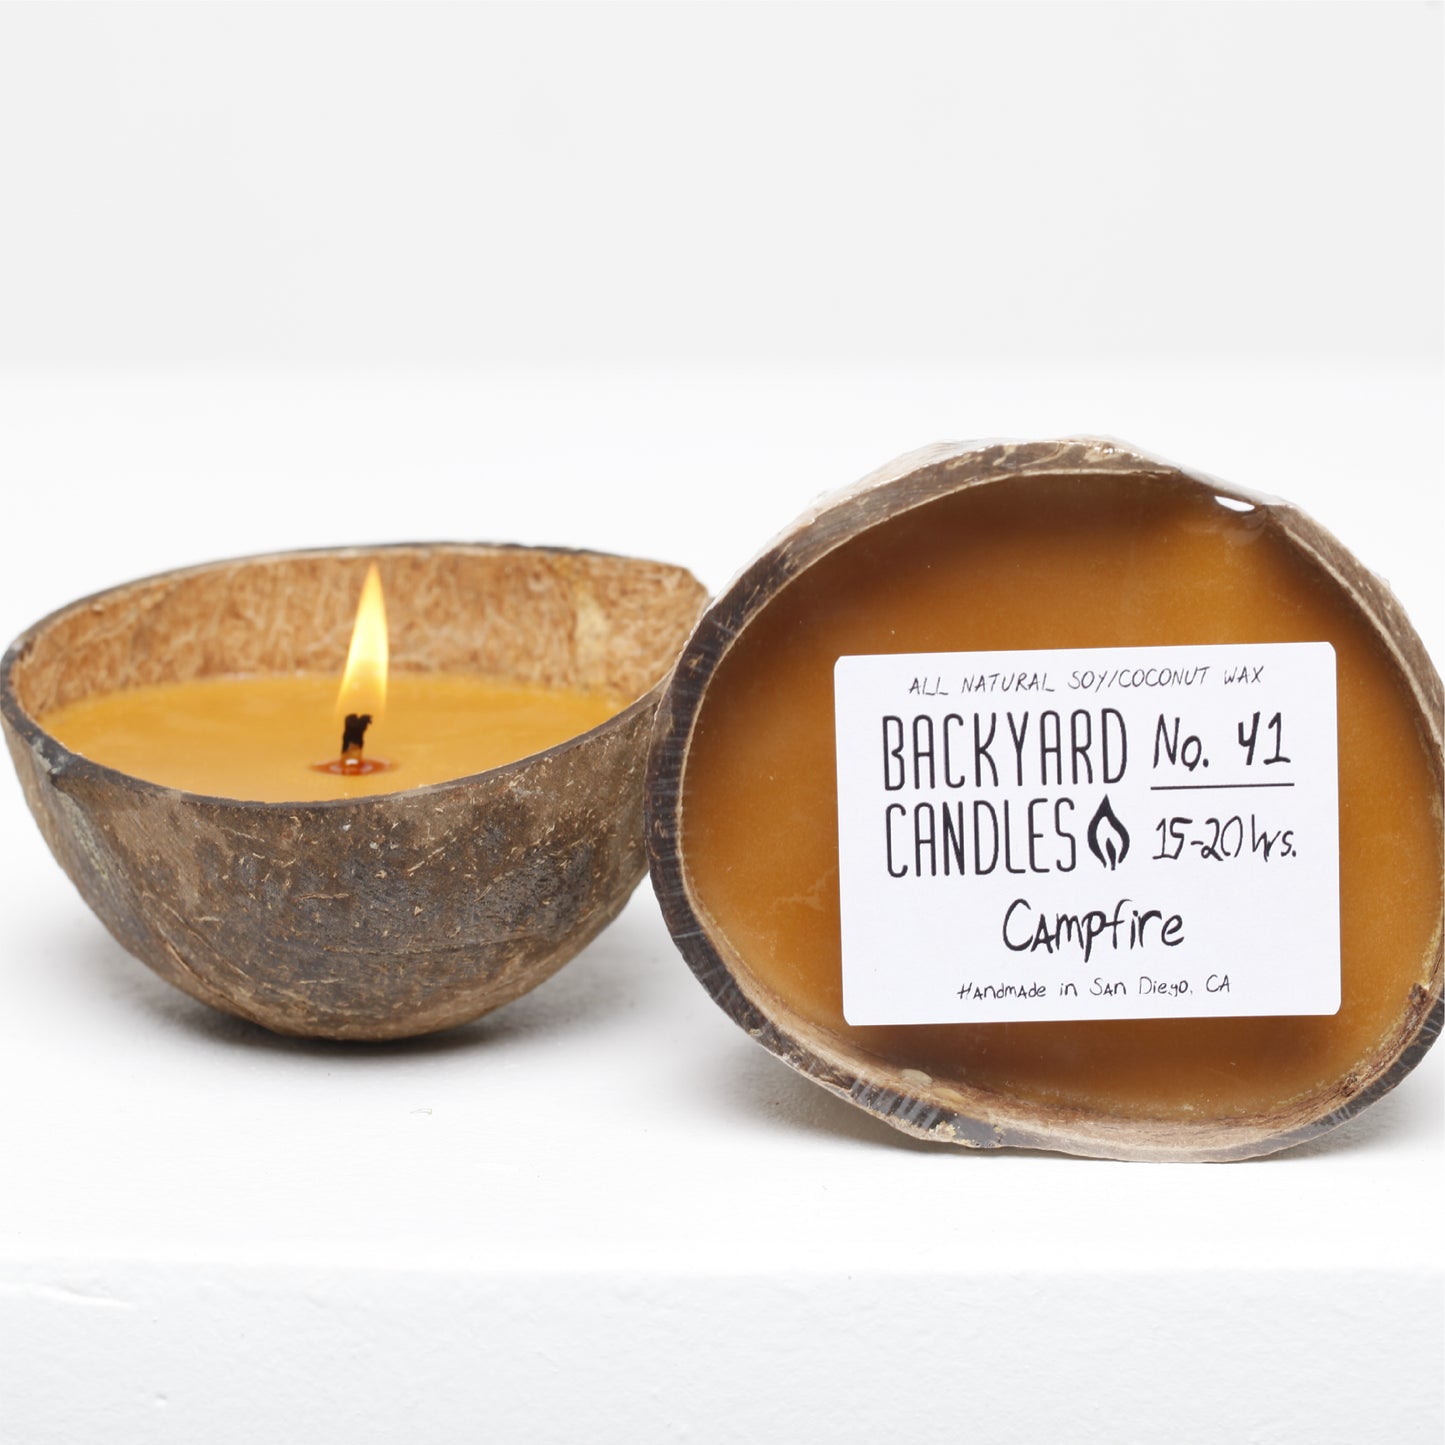 Fireside Soy Wood Wick Candle // Natural // Vegan // Campfire // Clean  Smoke Scent 